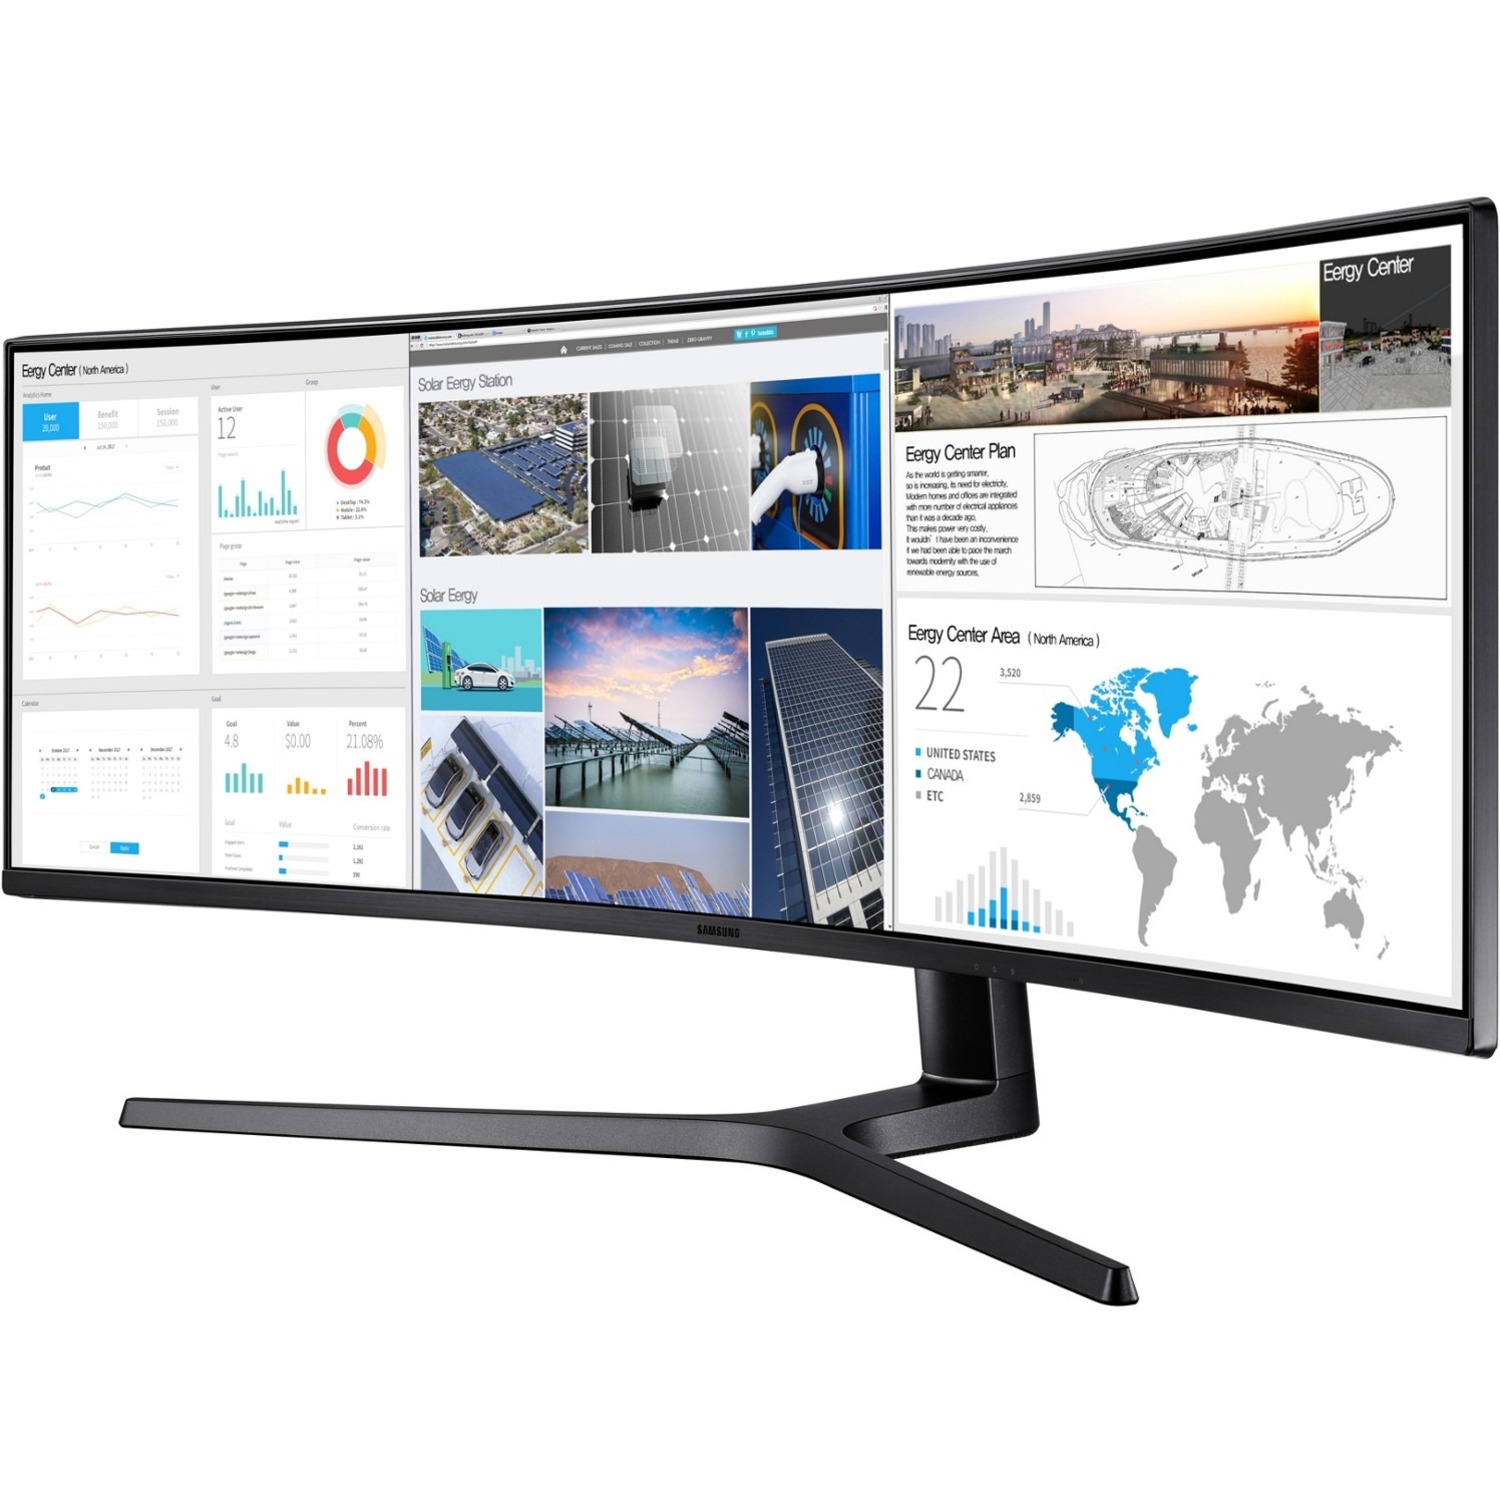 Samsung C49J89 49" Double Full HD (DFHD) Curved Screen LED LCD Monitor - 32:9 - Charcoal Black Hairline, Titanium_subImage_1